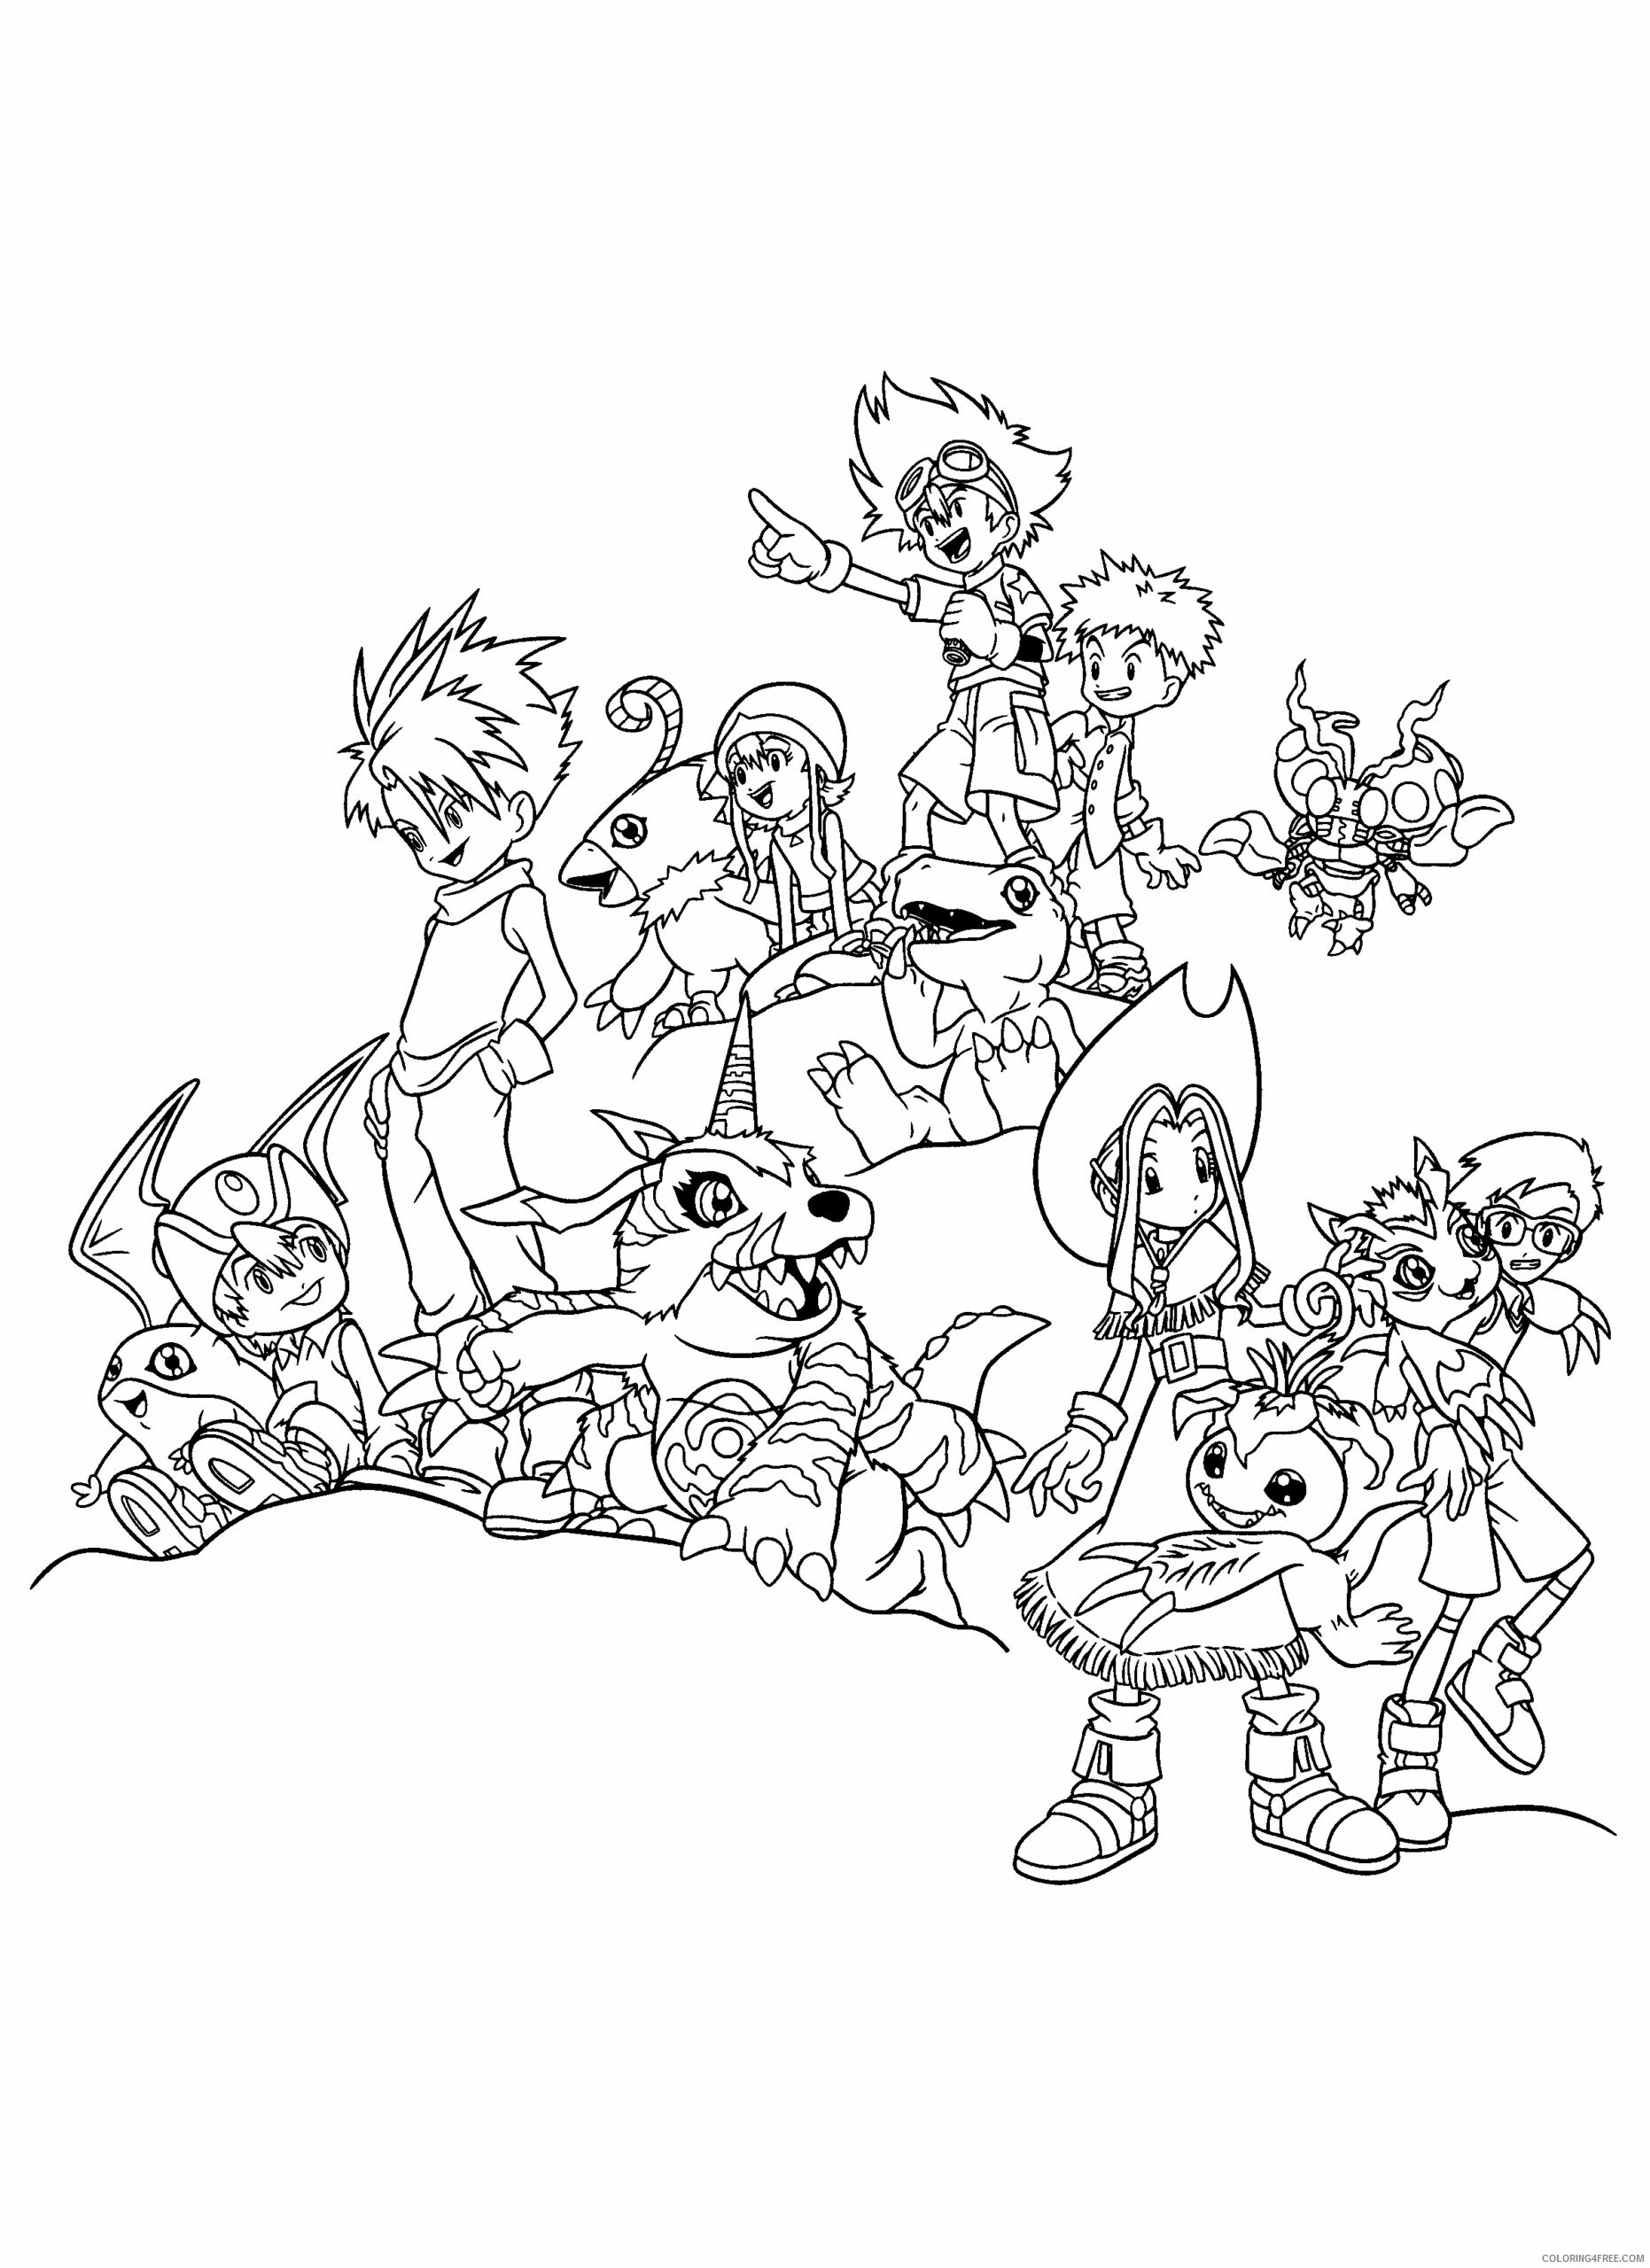 Digimon Printable Coloring Pages Anime digimon DZ0Oc 2021 0168 Coloring4free